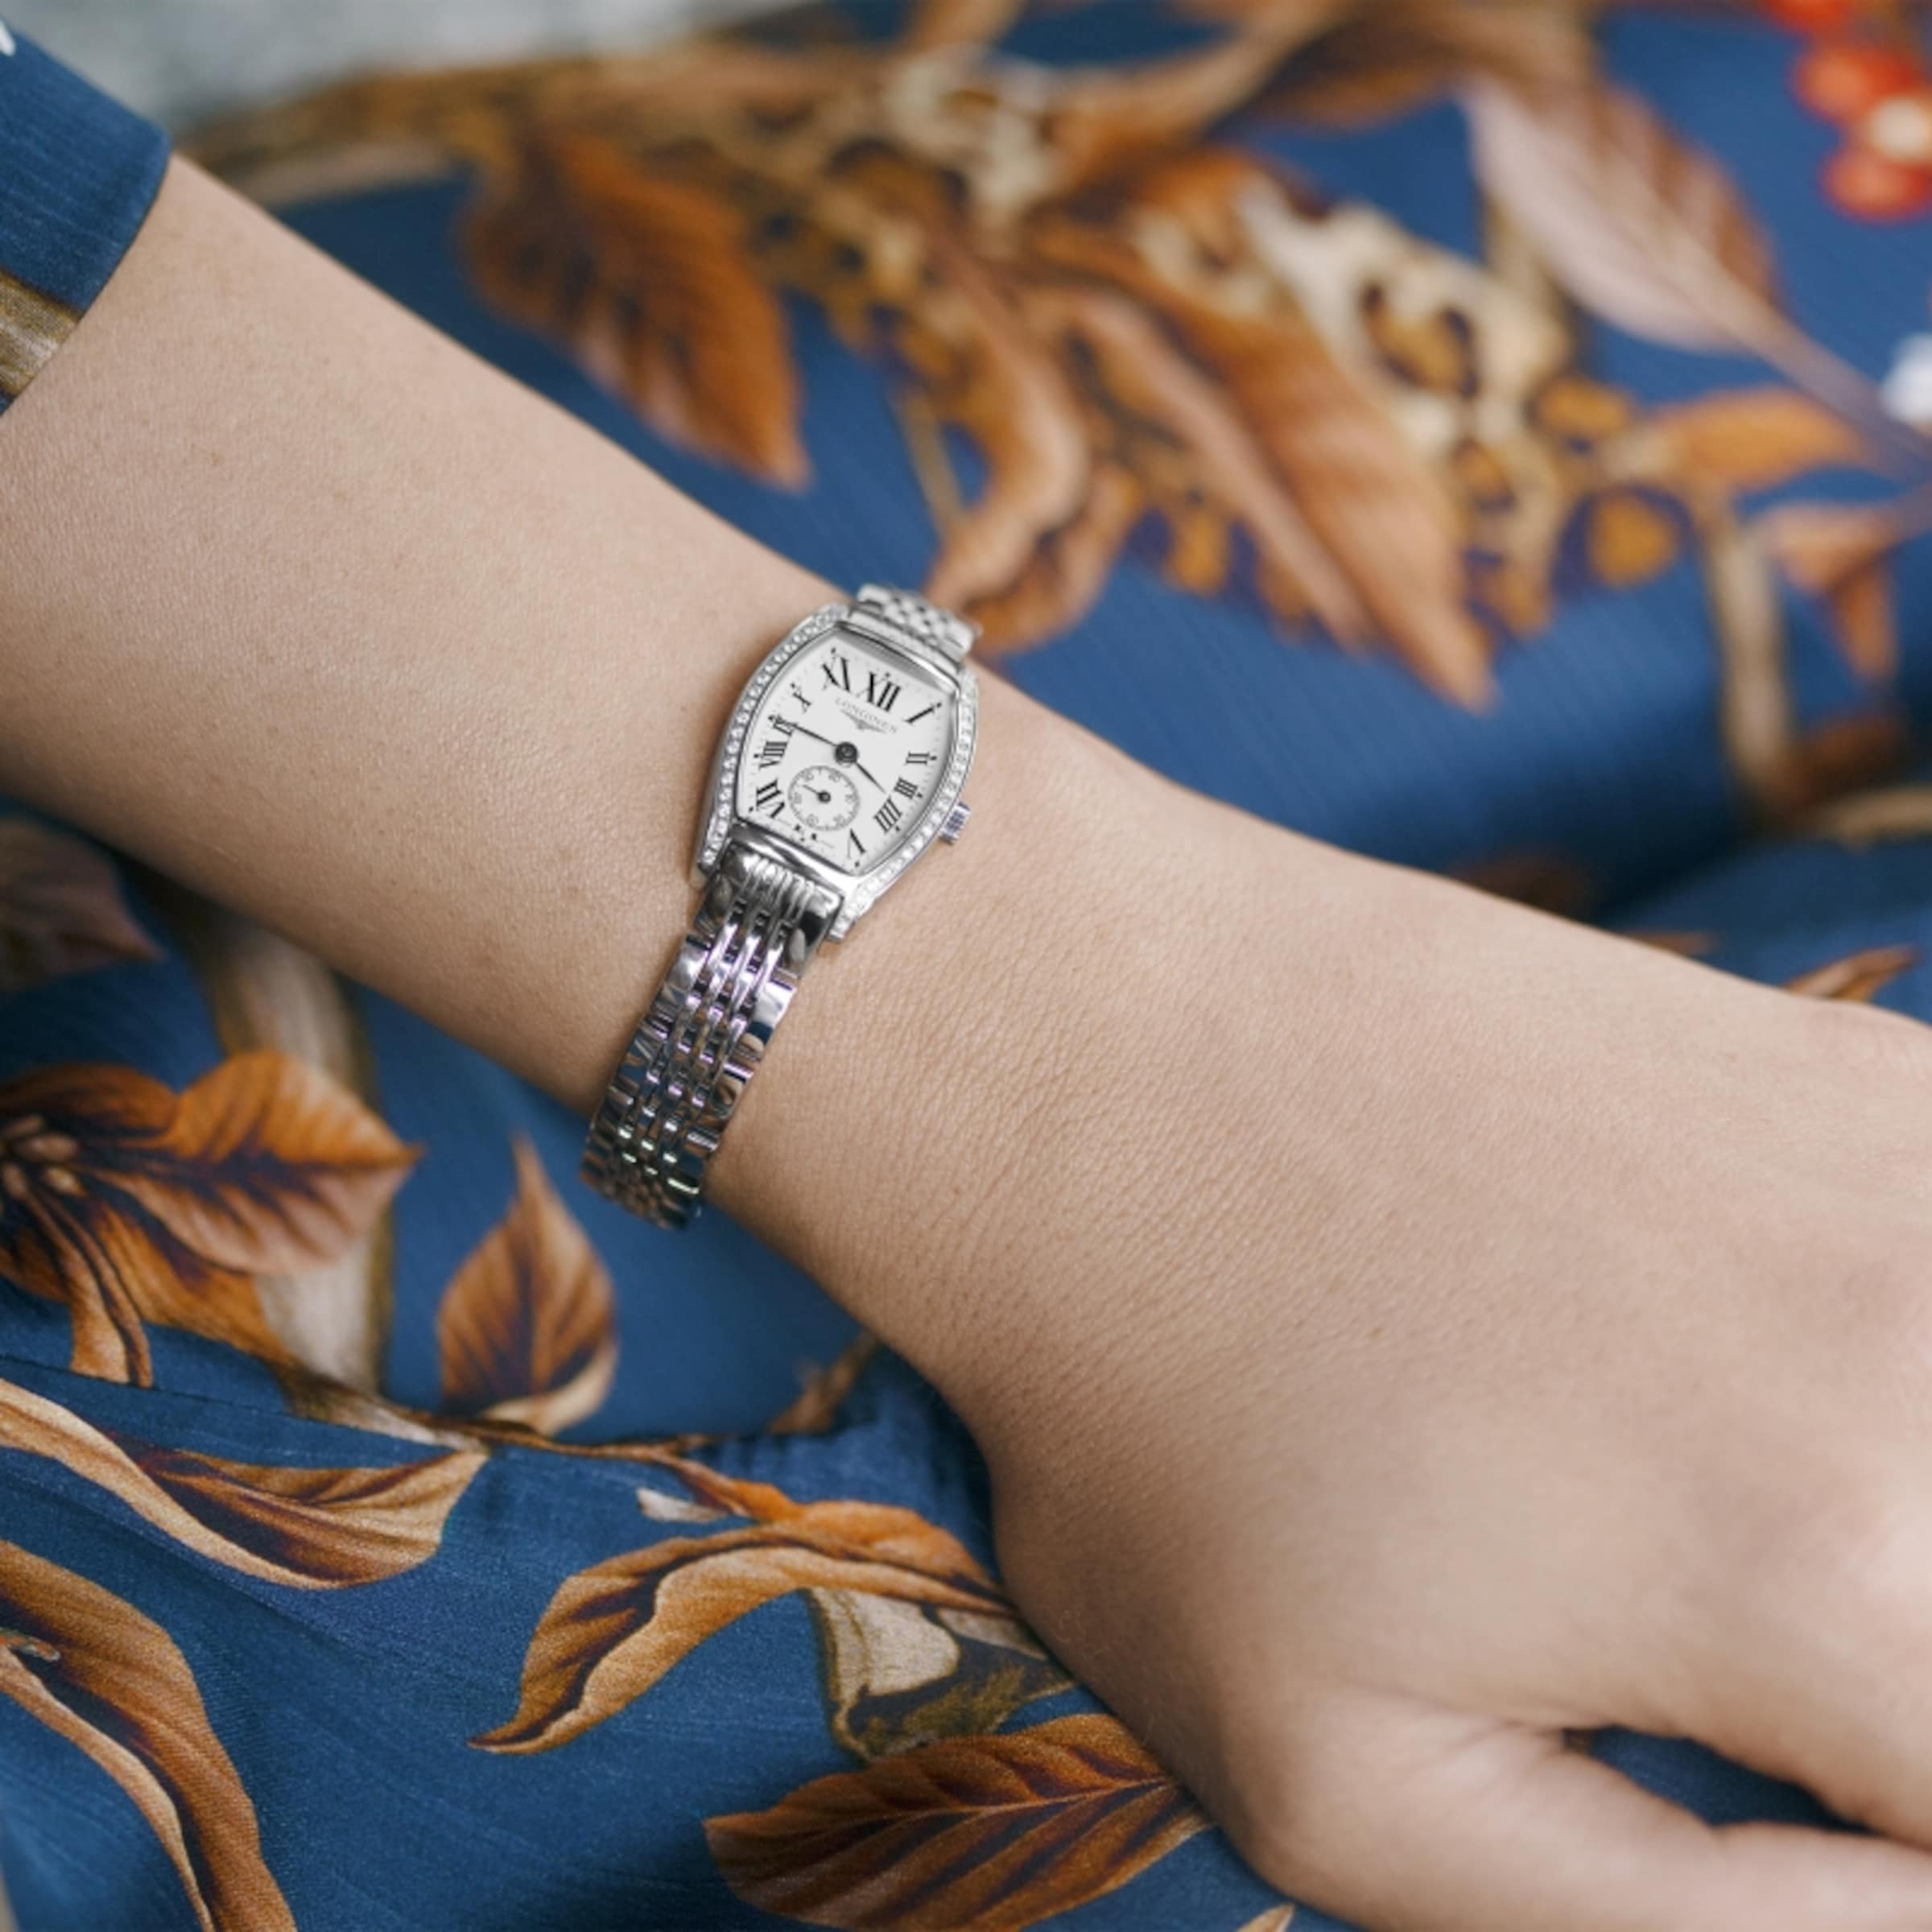 A woman is wearing a Longines evidenza watch